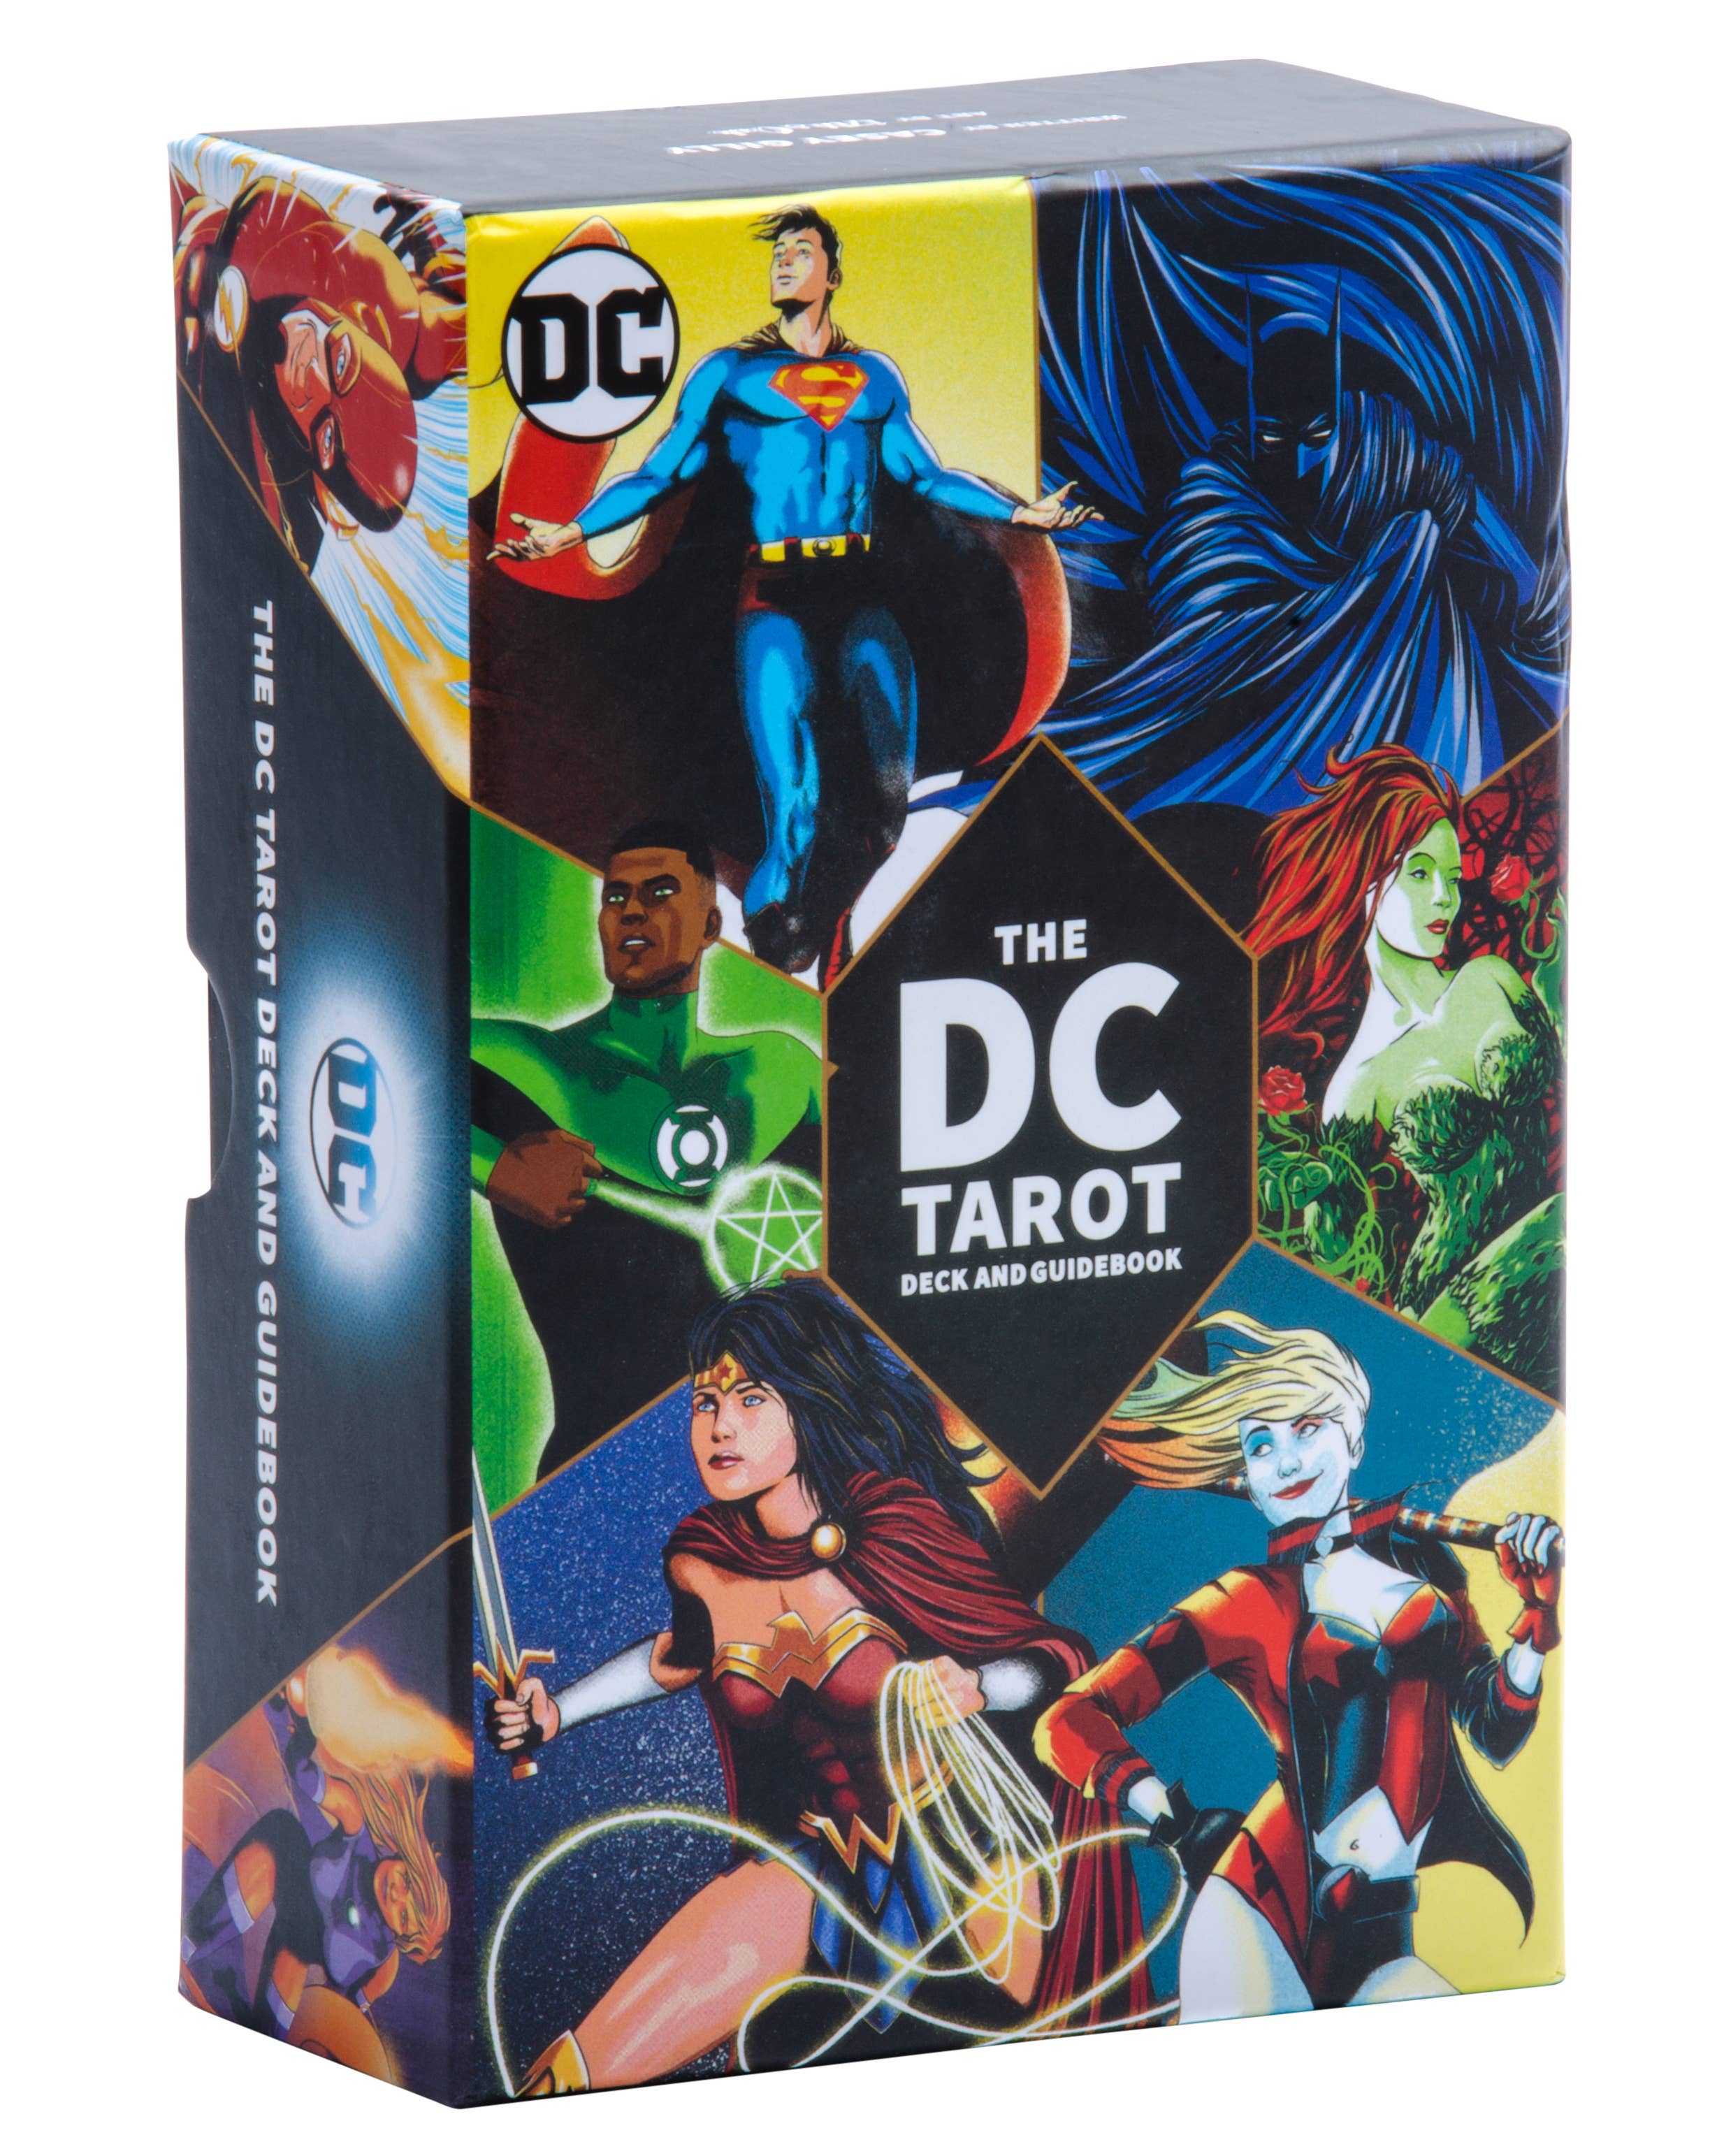 The DC Tarot Deck and Guidebook - Bards & Cards